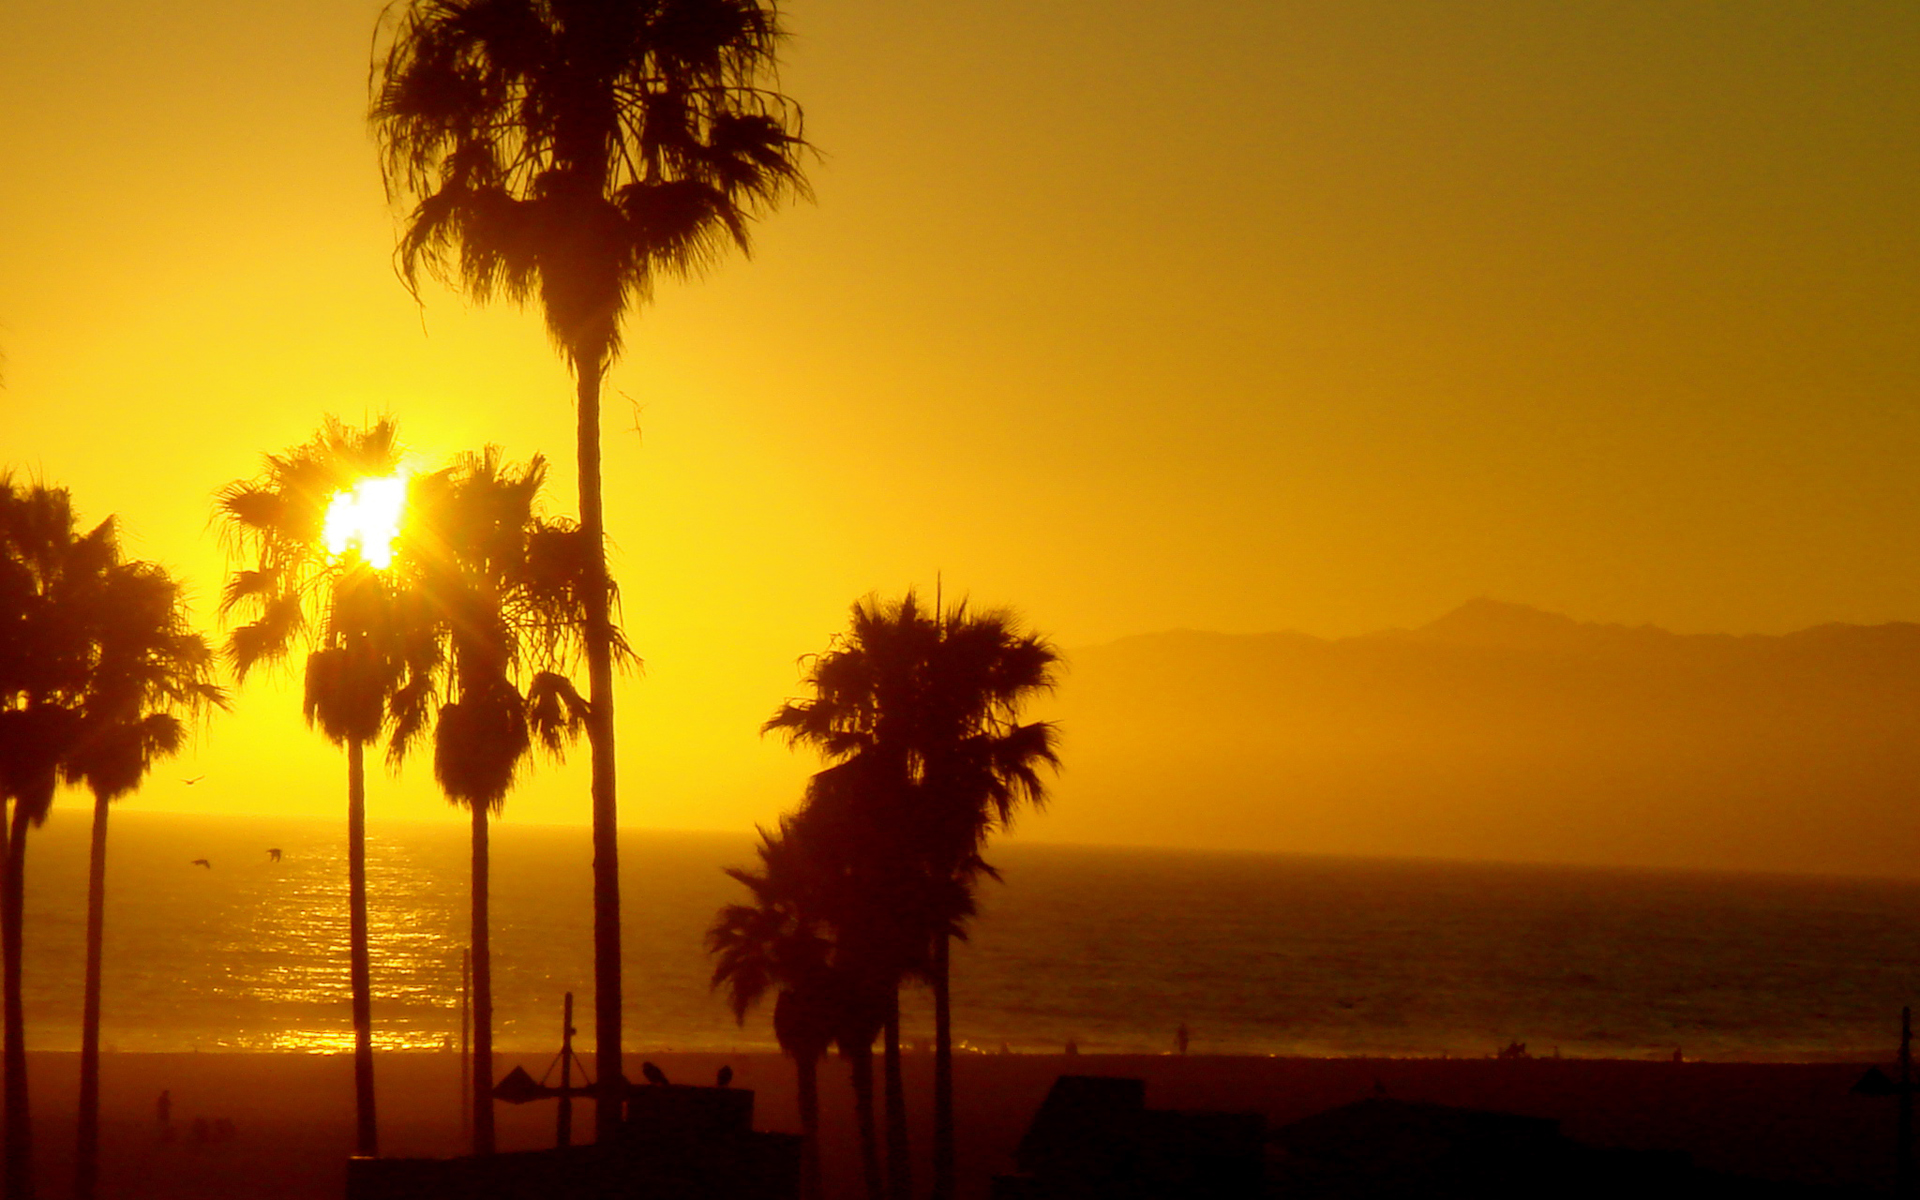 Yellow sun shining over a peaceful Earth, with a palm tree by the water.